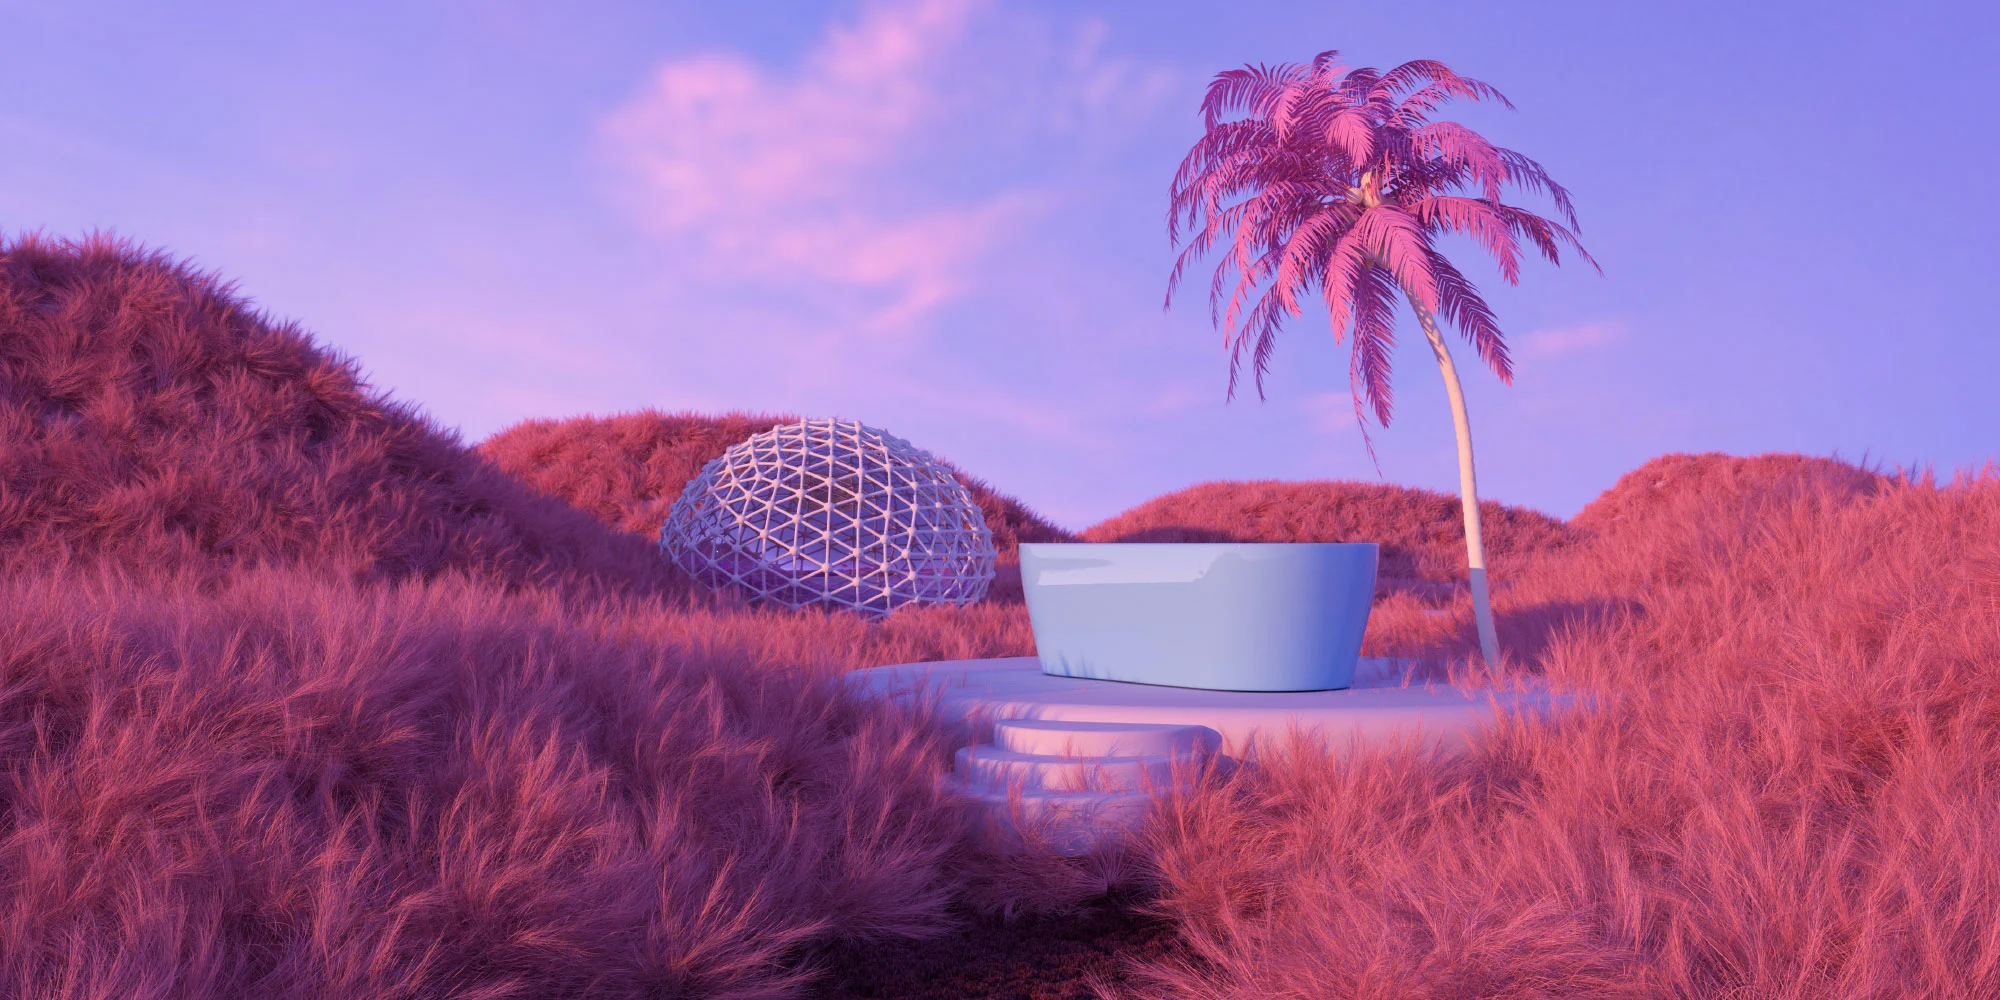 An image representing the metaverse with computer generated hills, a stone plinth in the centre and a palm tree